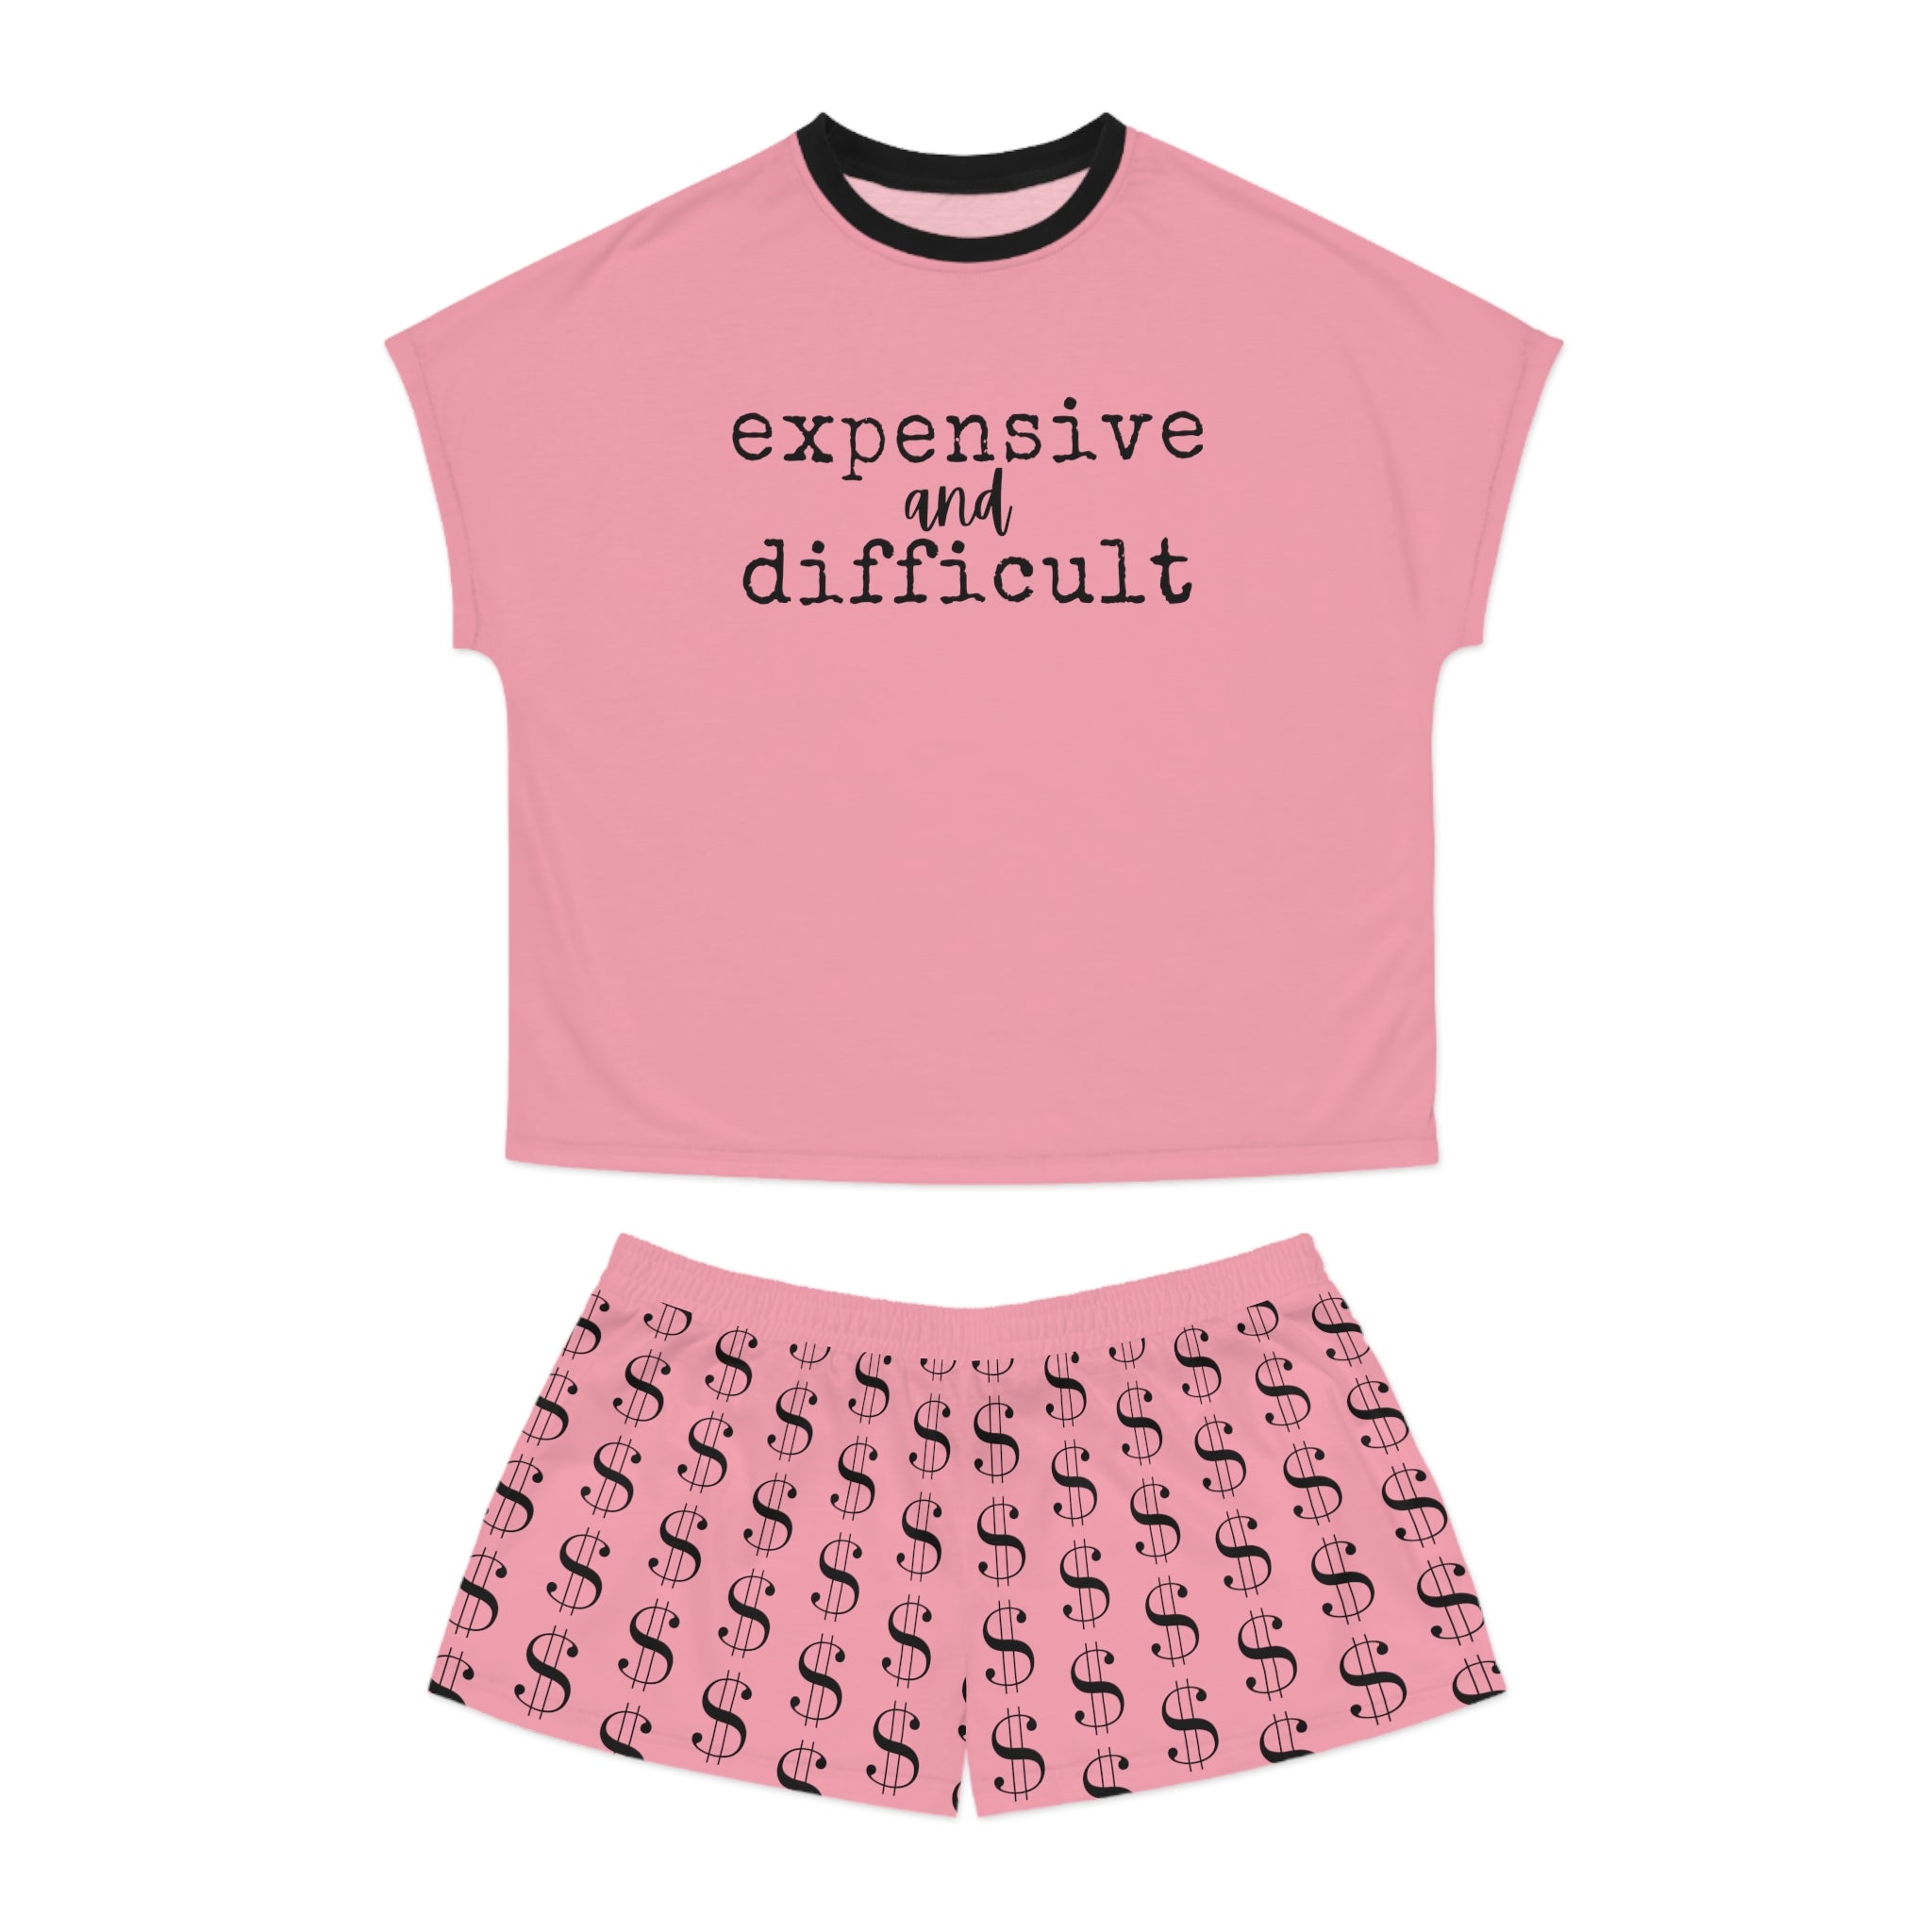 EXPENSIVE and DIFFICULT in Pink Women's Two Piece Shorts Pyjama Set, Women's Pyjamas, Bridal PJs